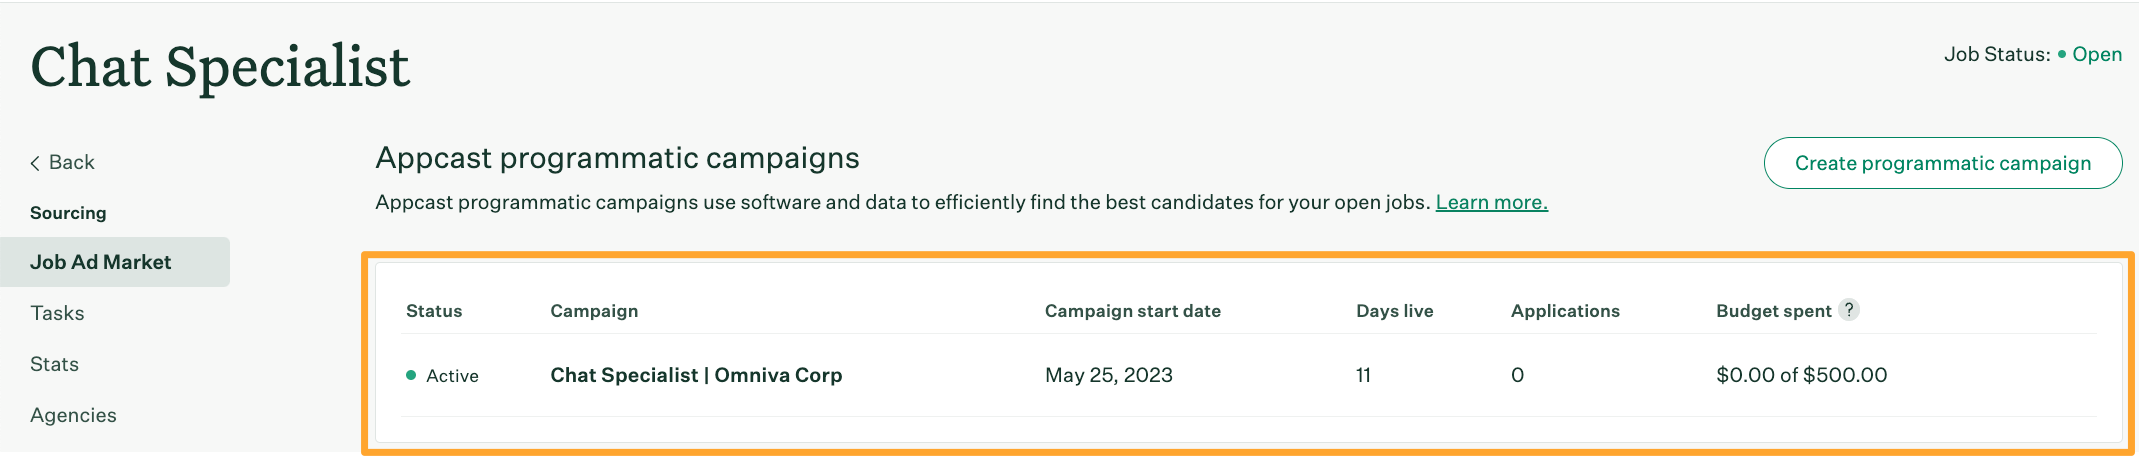 Job Ad Market page displaying the programmatic campaign dashboard, with one active campaign shown